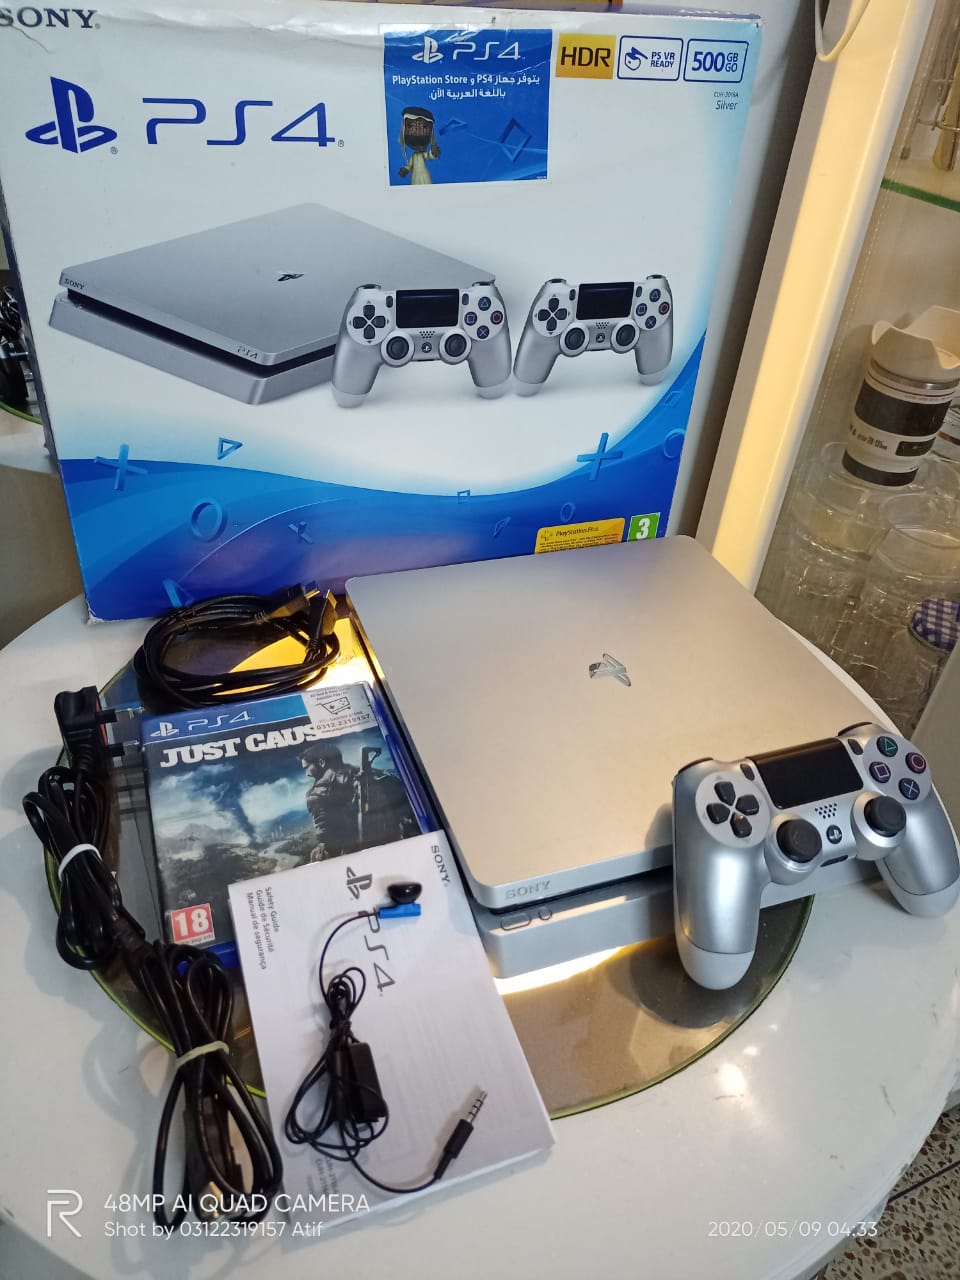 ps4 available in store